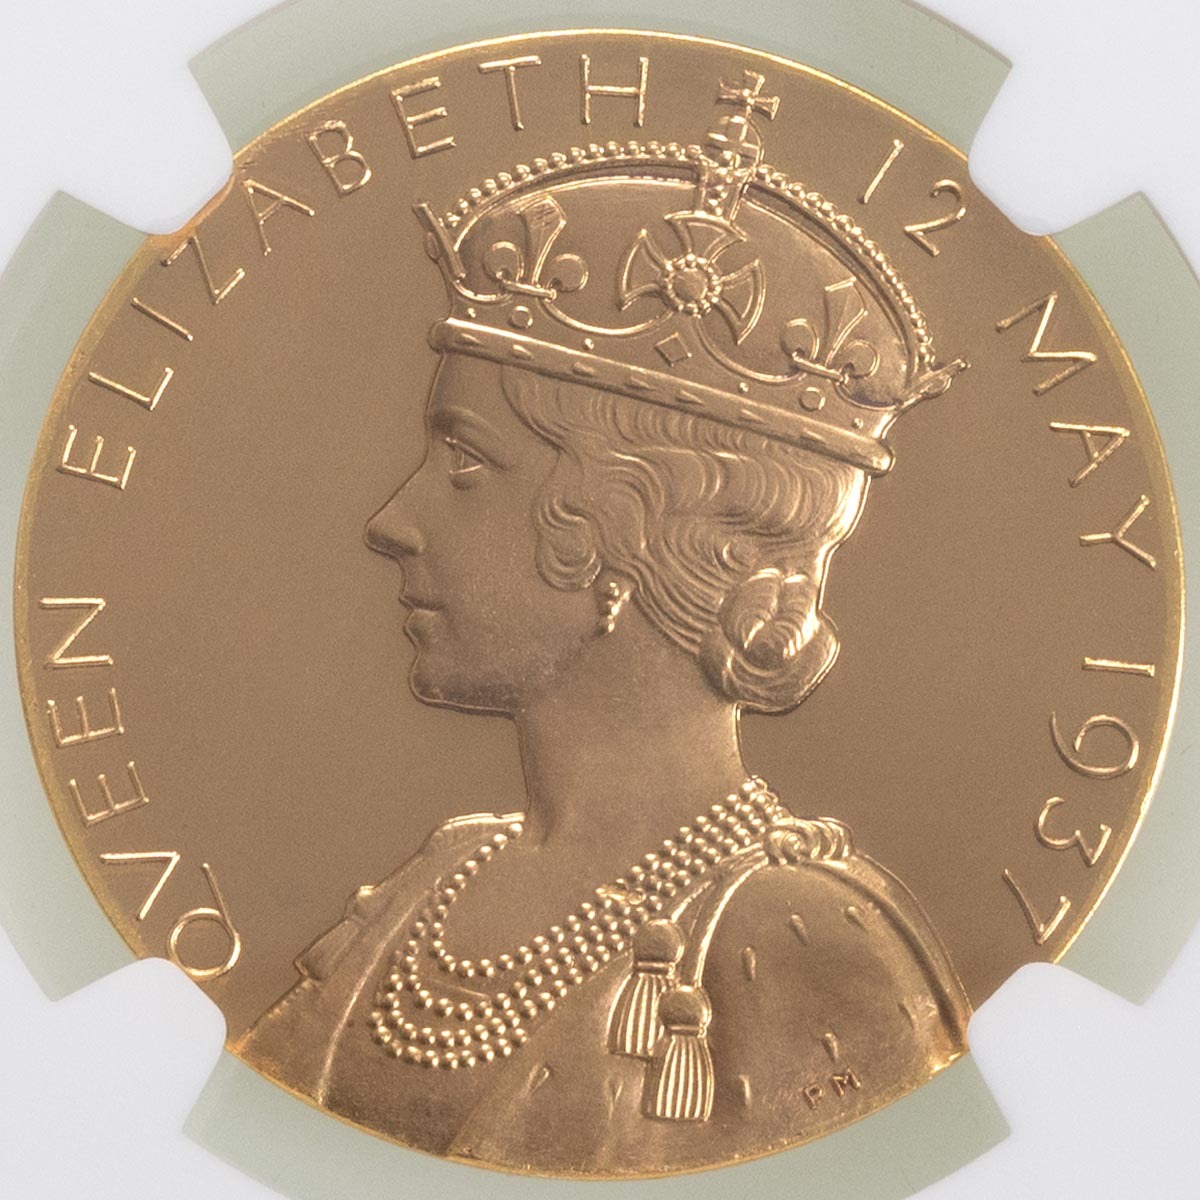 1937 King George VI Gold Coronation Medal Percy Metcalfe NGC Graded MS 65 Reverse